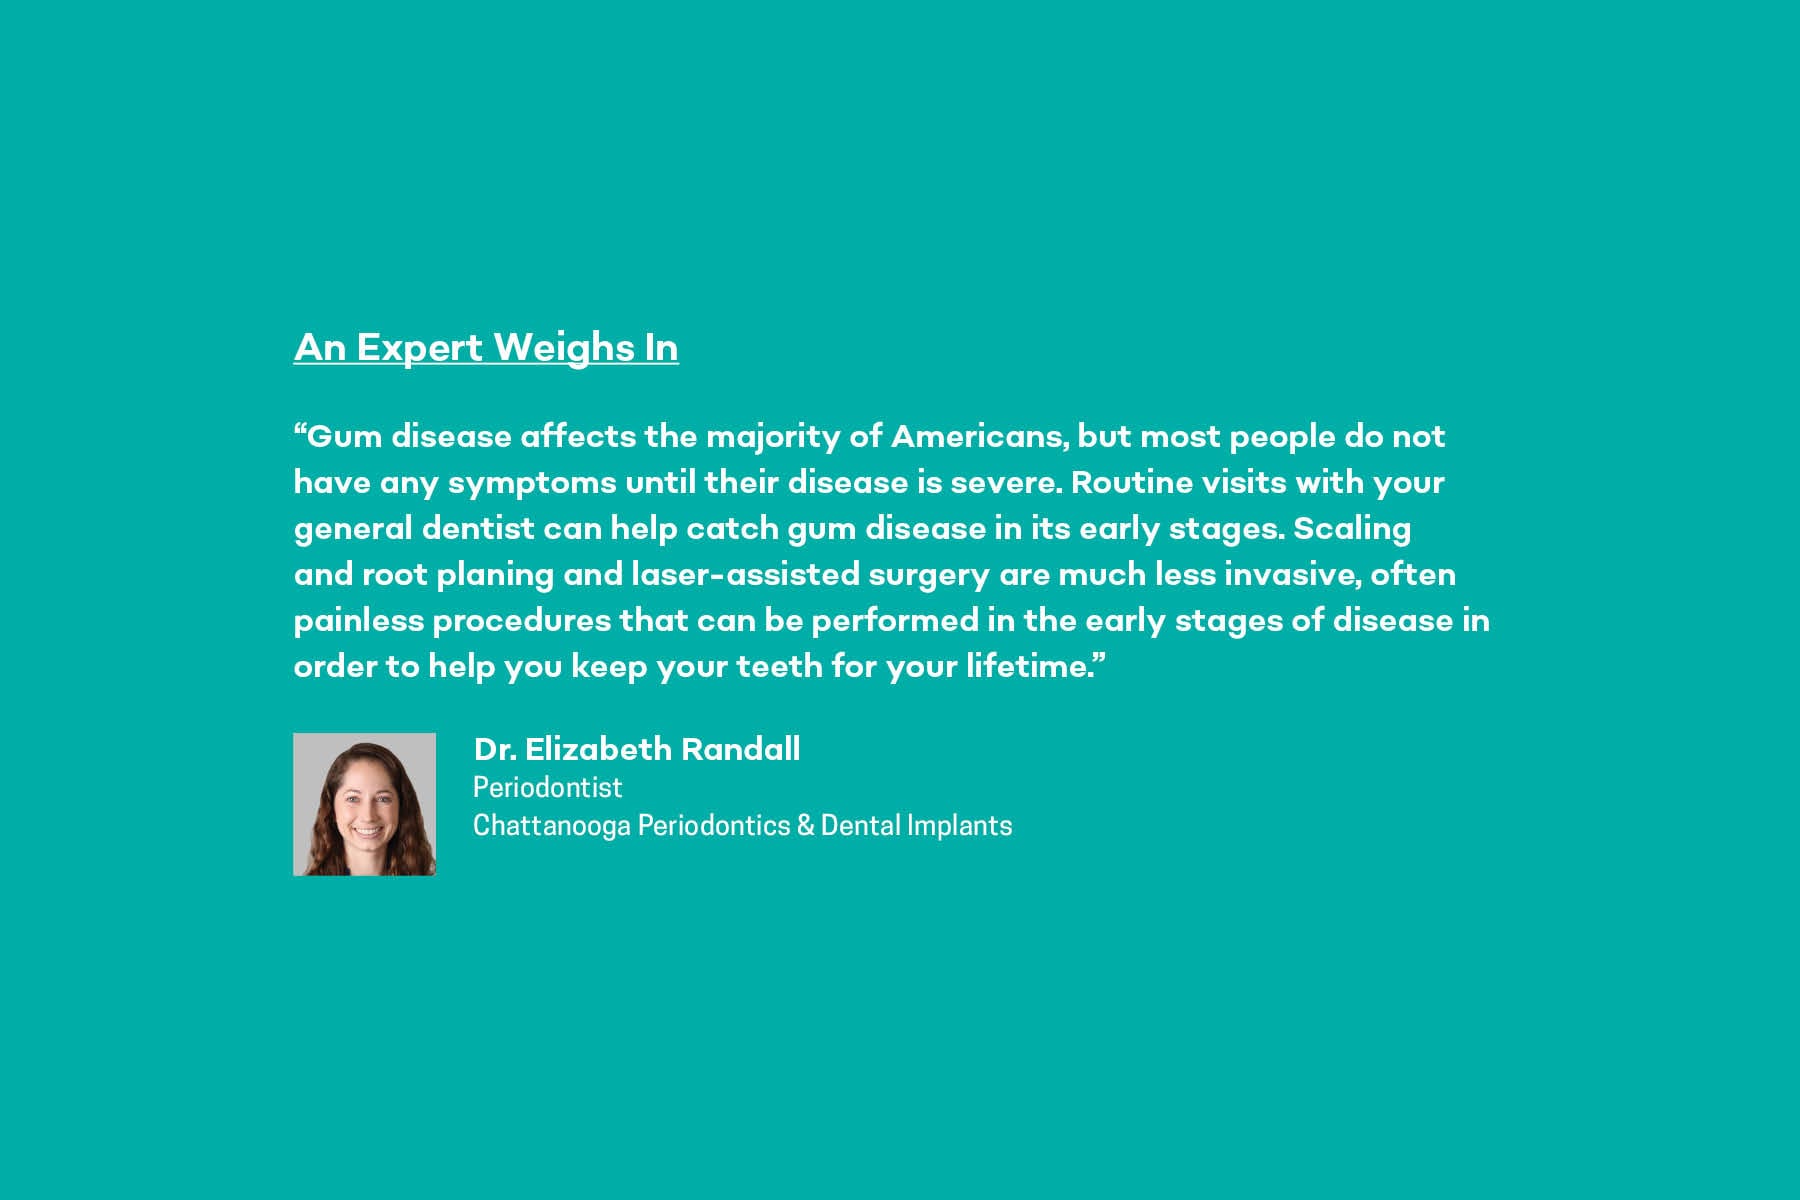 Dr. Elizabeth Randall at Chattanooga Periodontics & Dental Implants shares her expert opinion on gum disease treatment